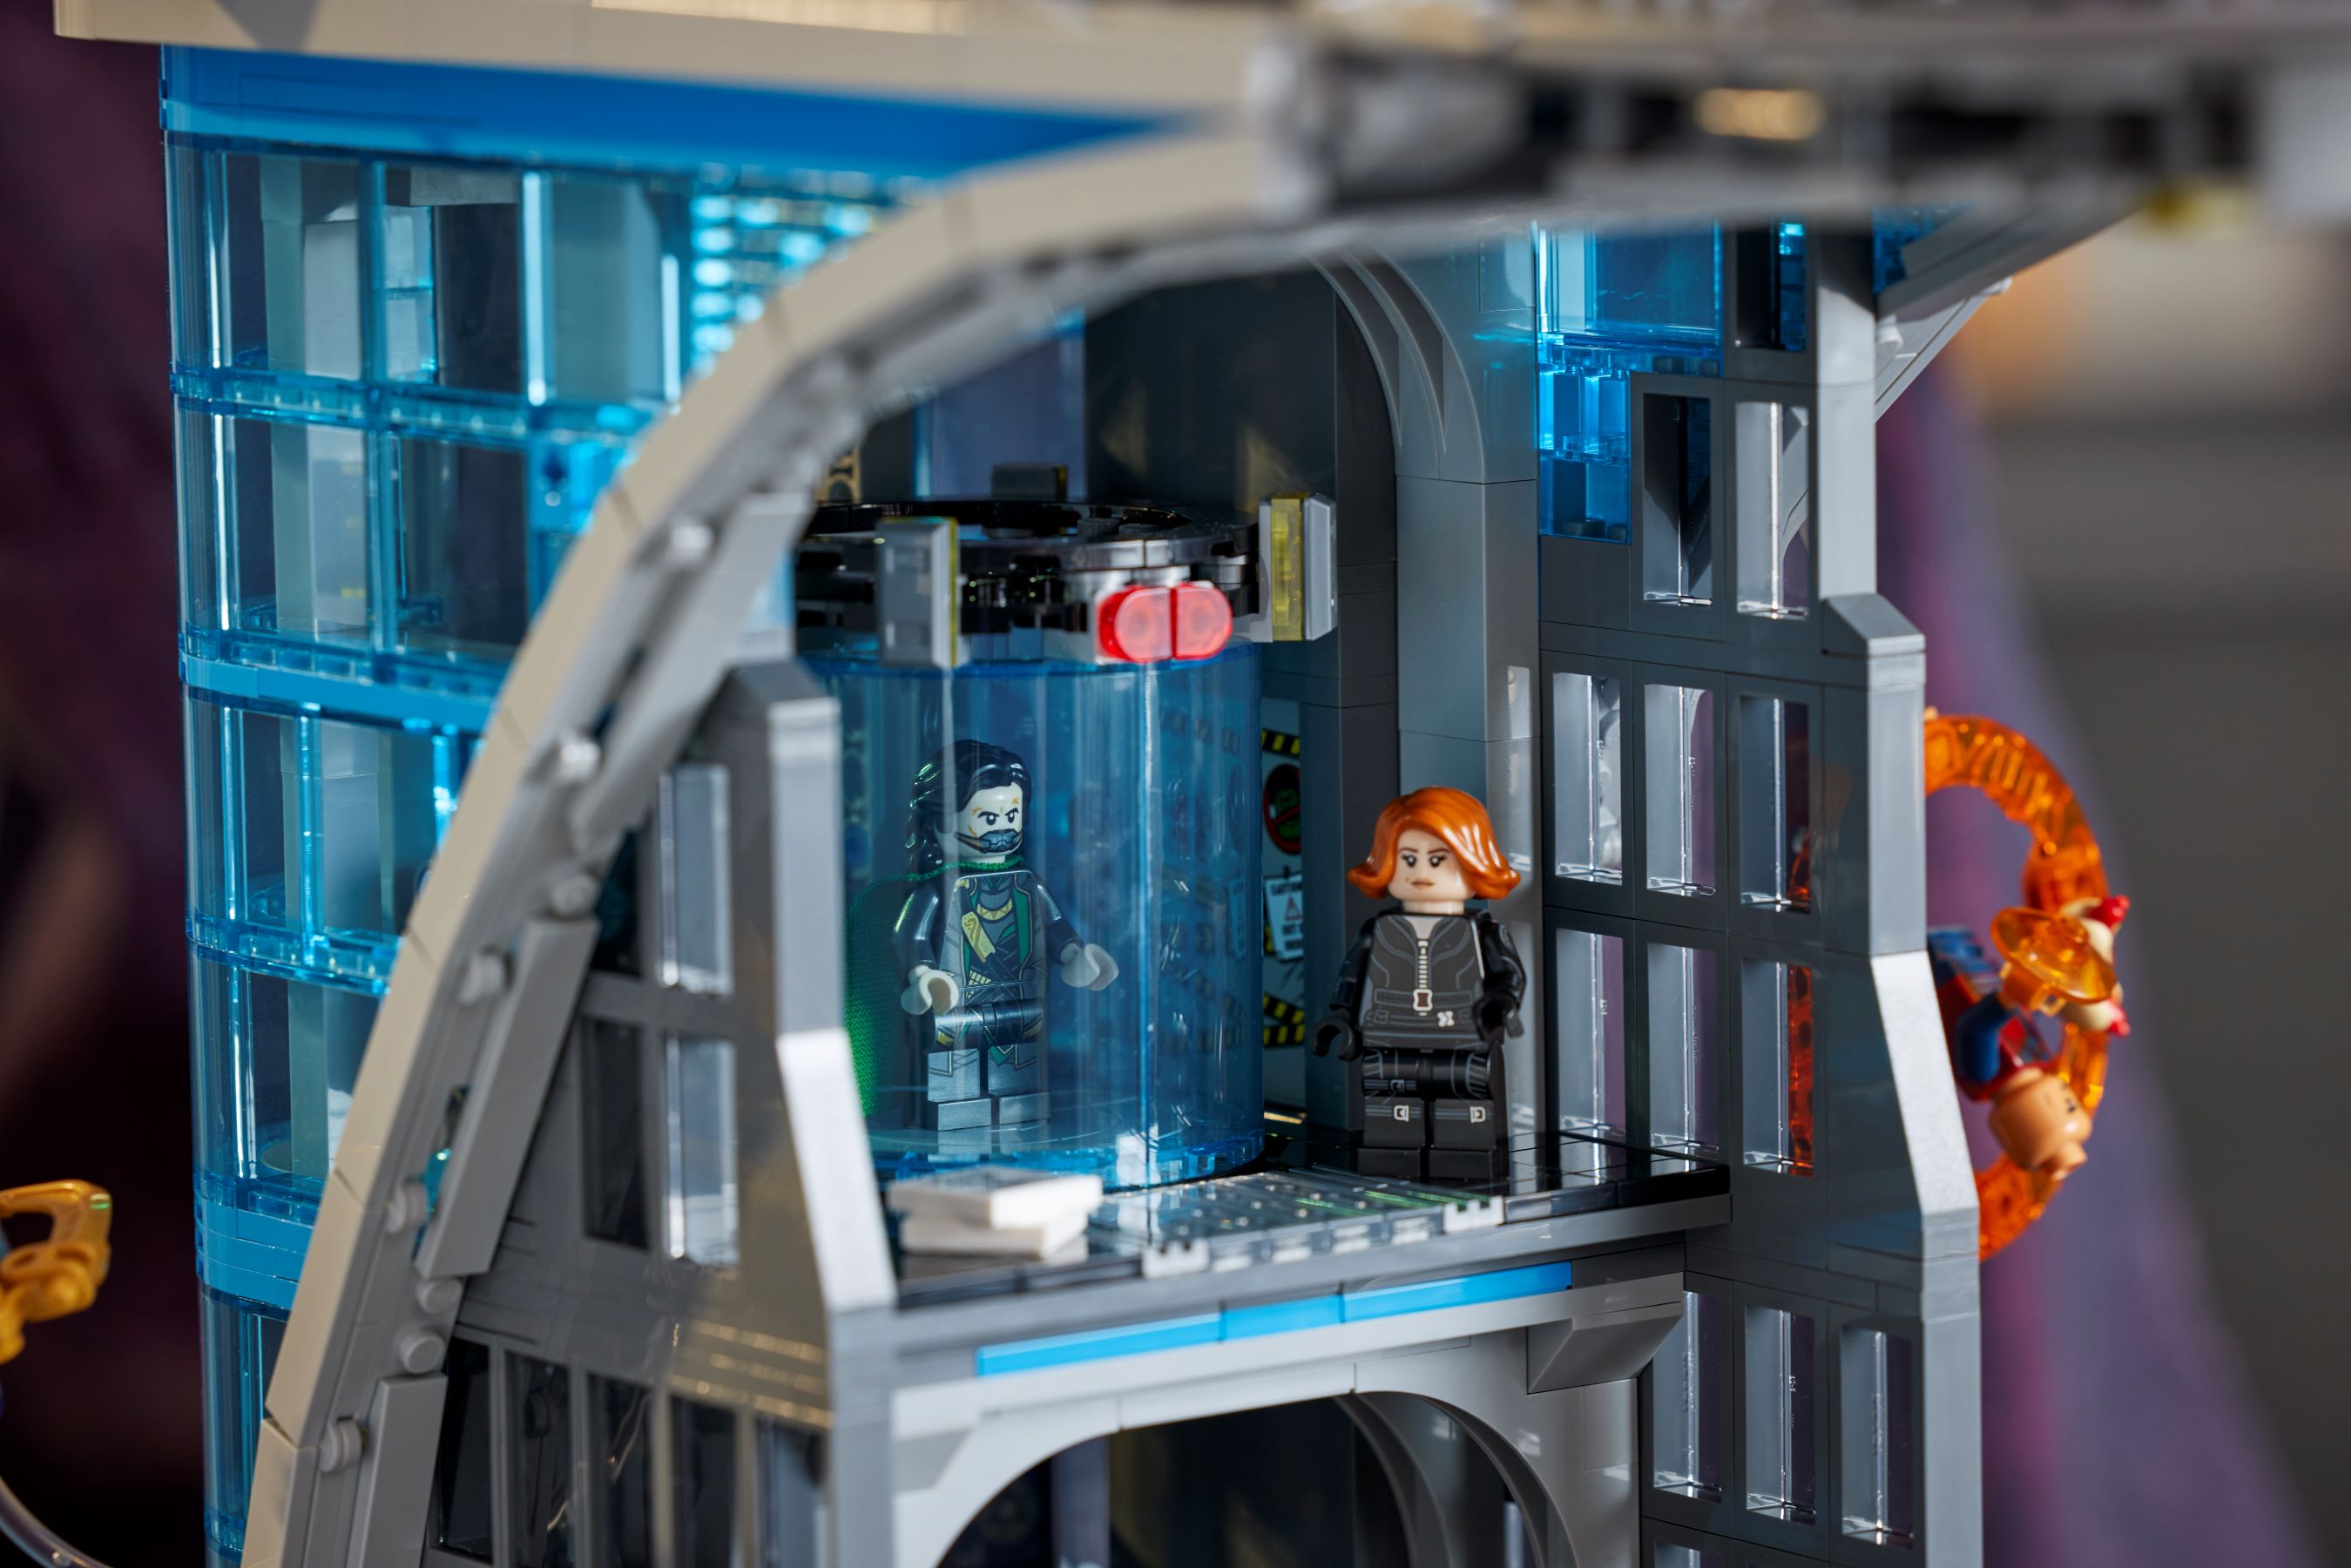 ▻ LEGO Marvel 76269 Avengers Tower: the set is online on the Shop